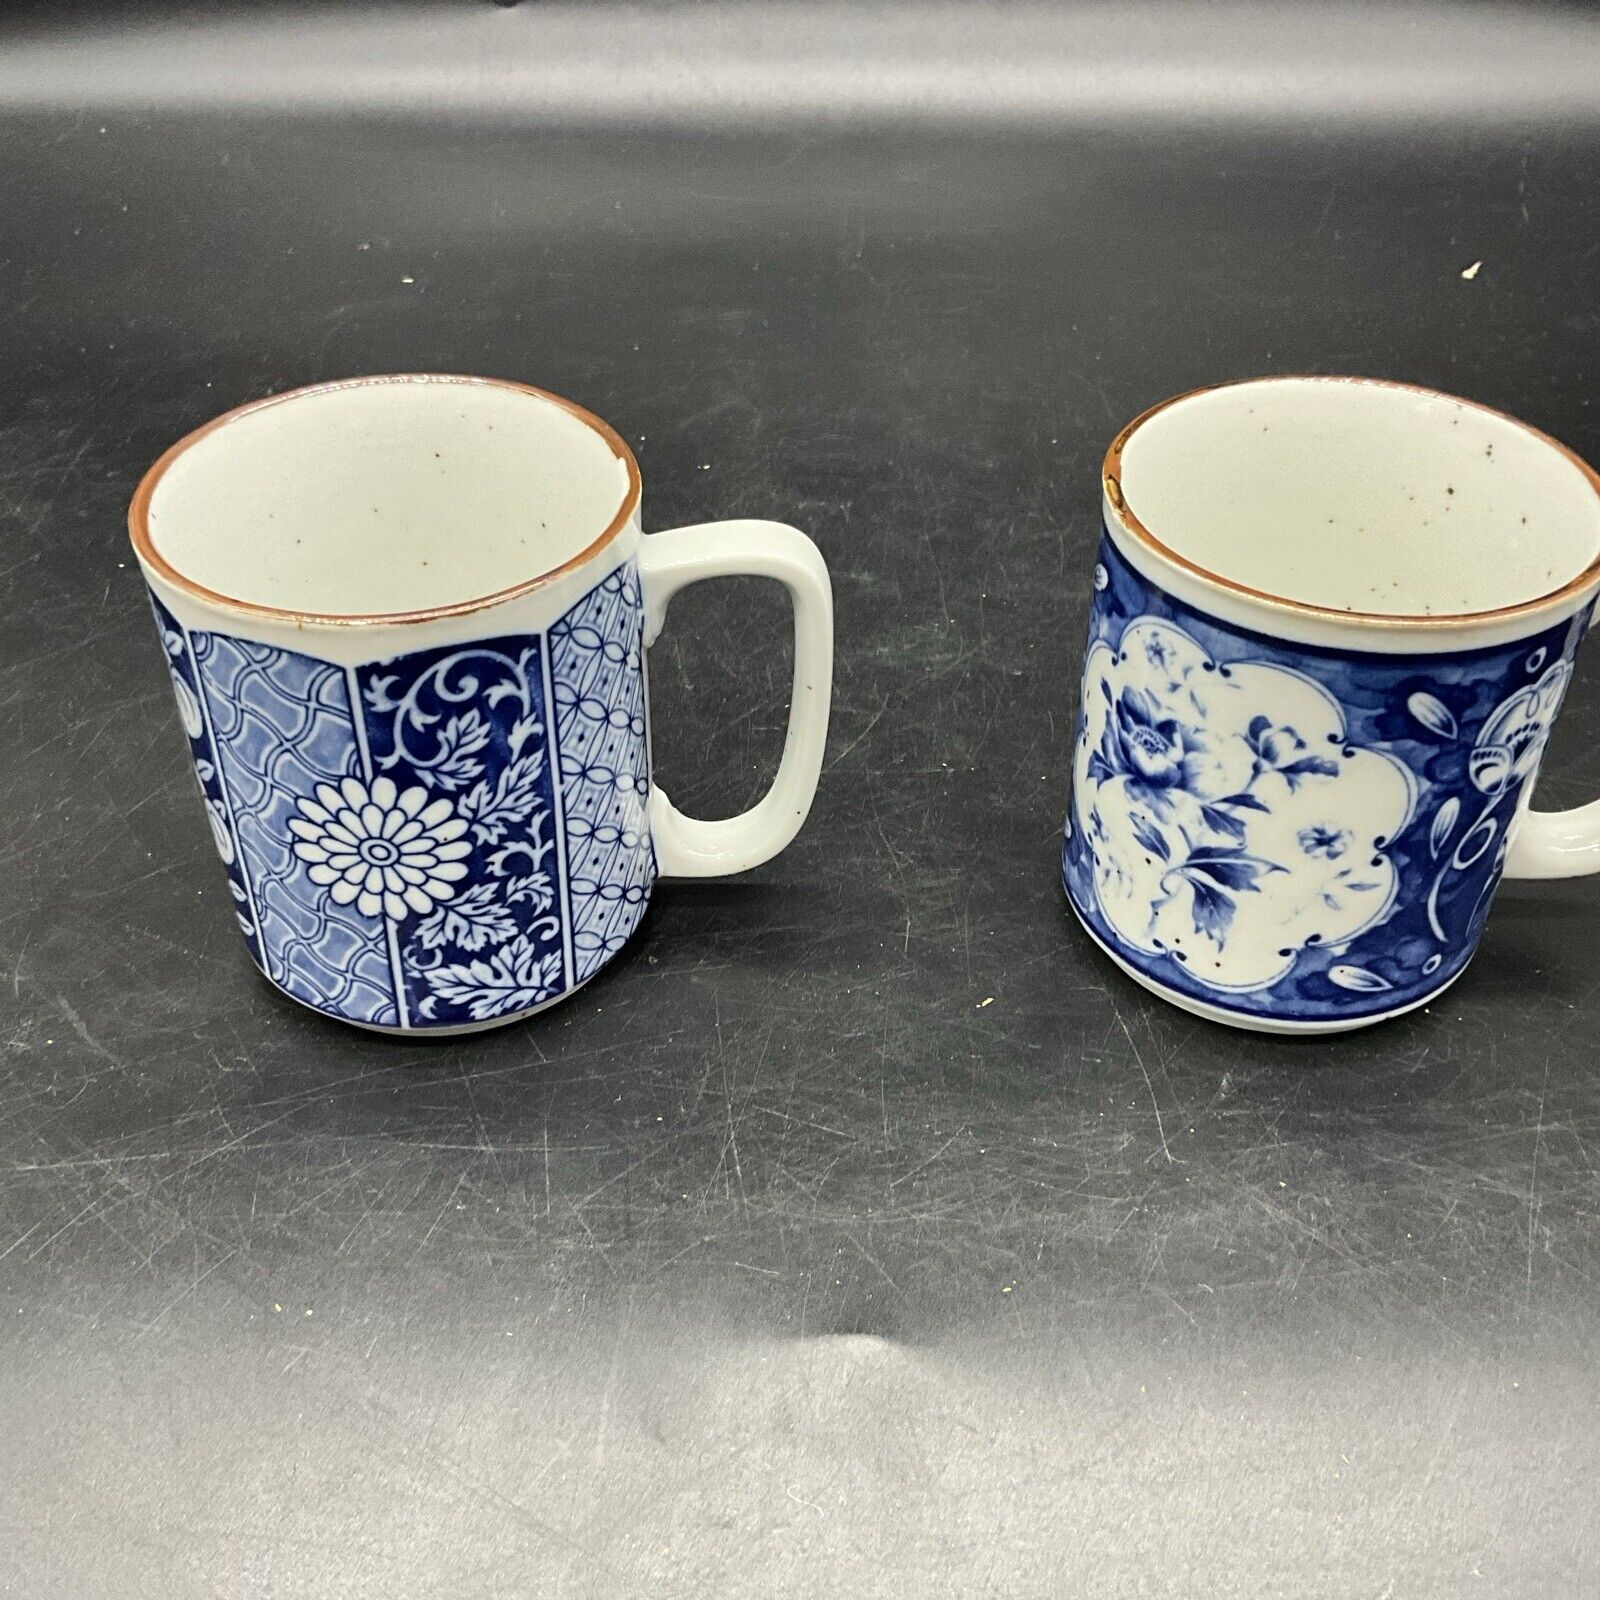 VTG Pair Of Japan Speckled Stoneware Blue Floral Pattern Coffee Mugs